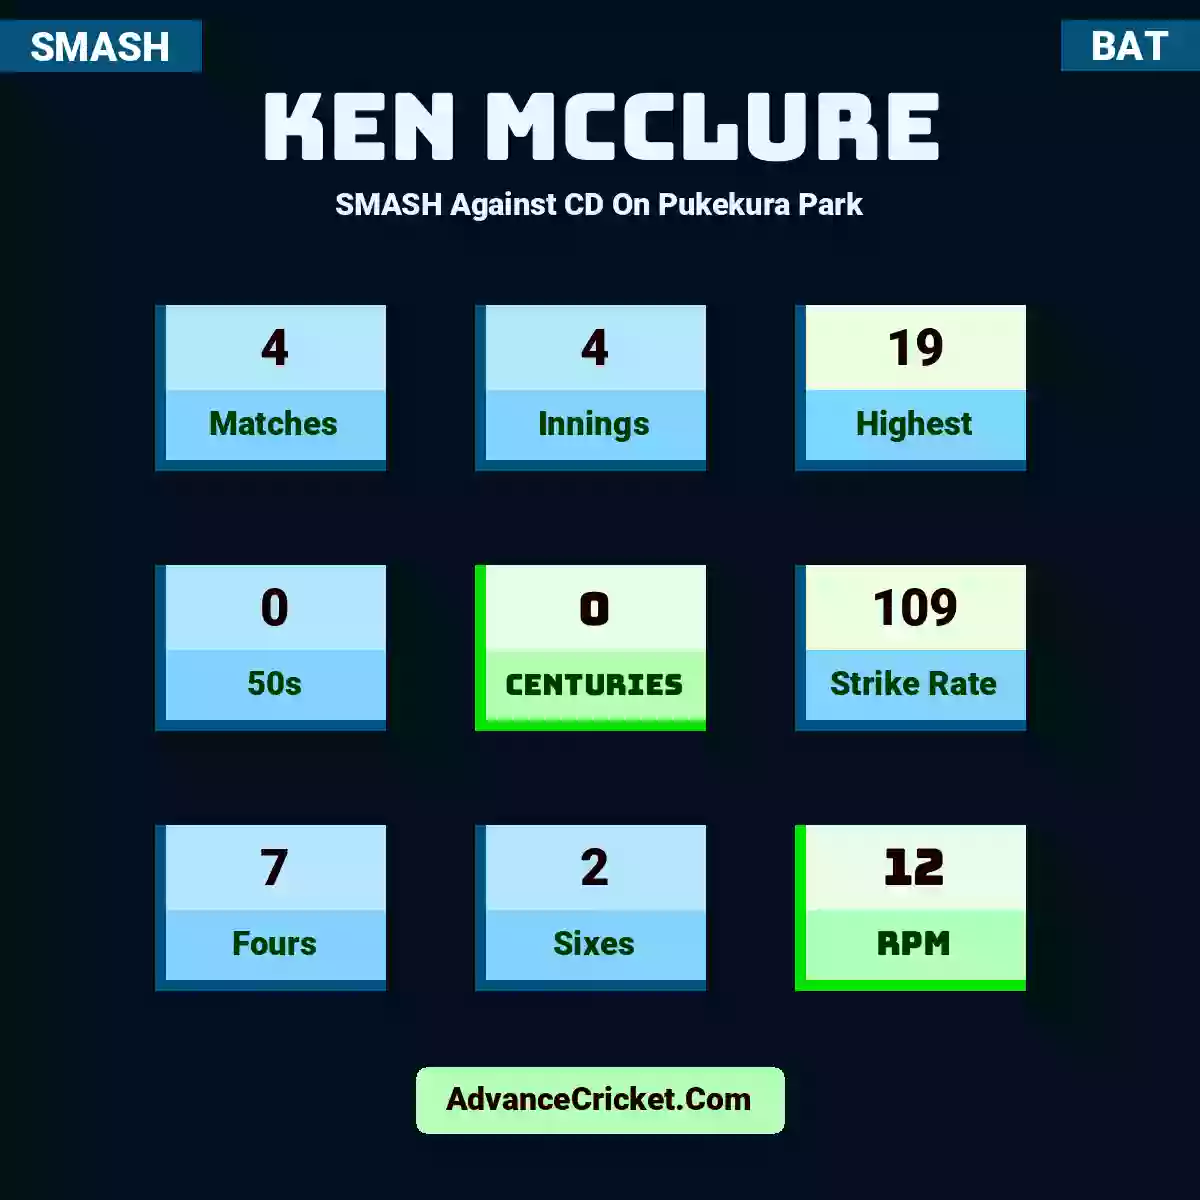 Ken McClure SMASH  Against CD On Pukekura Park, Ken McClure played 4 matches, scored 19 runs as highest, 0 half-centuries, and 0 centuries, with a strike rate of 109. K.McClure hit 7 fours and 2 sixes, with an RPM of 12.